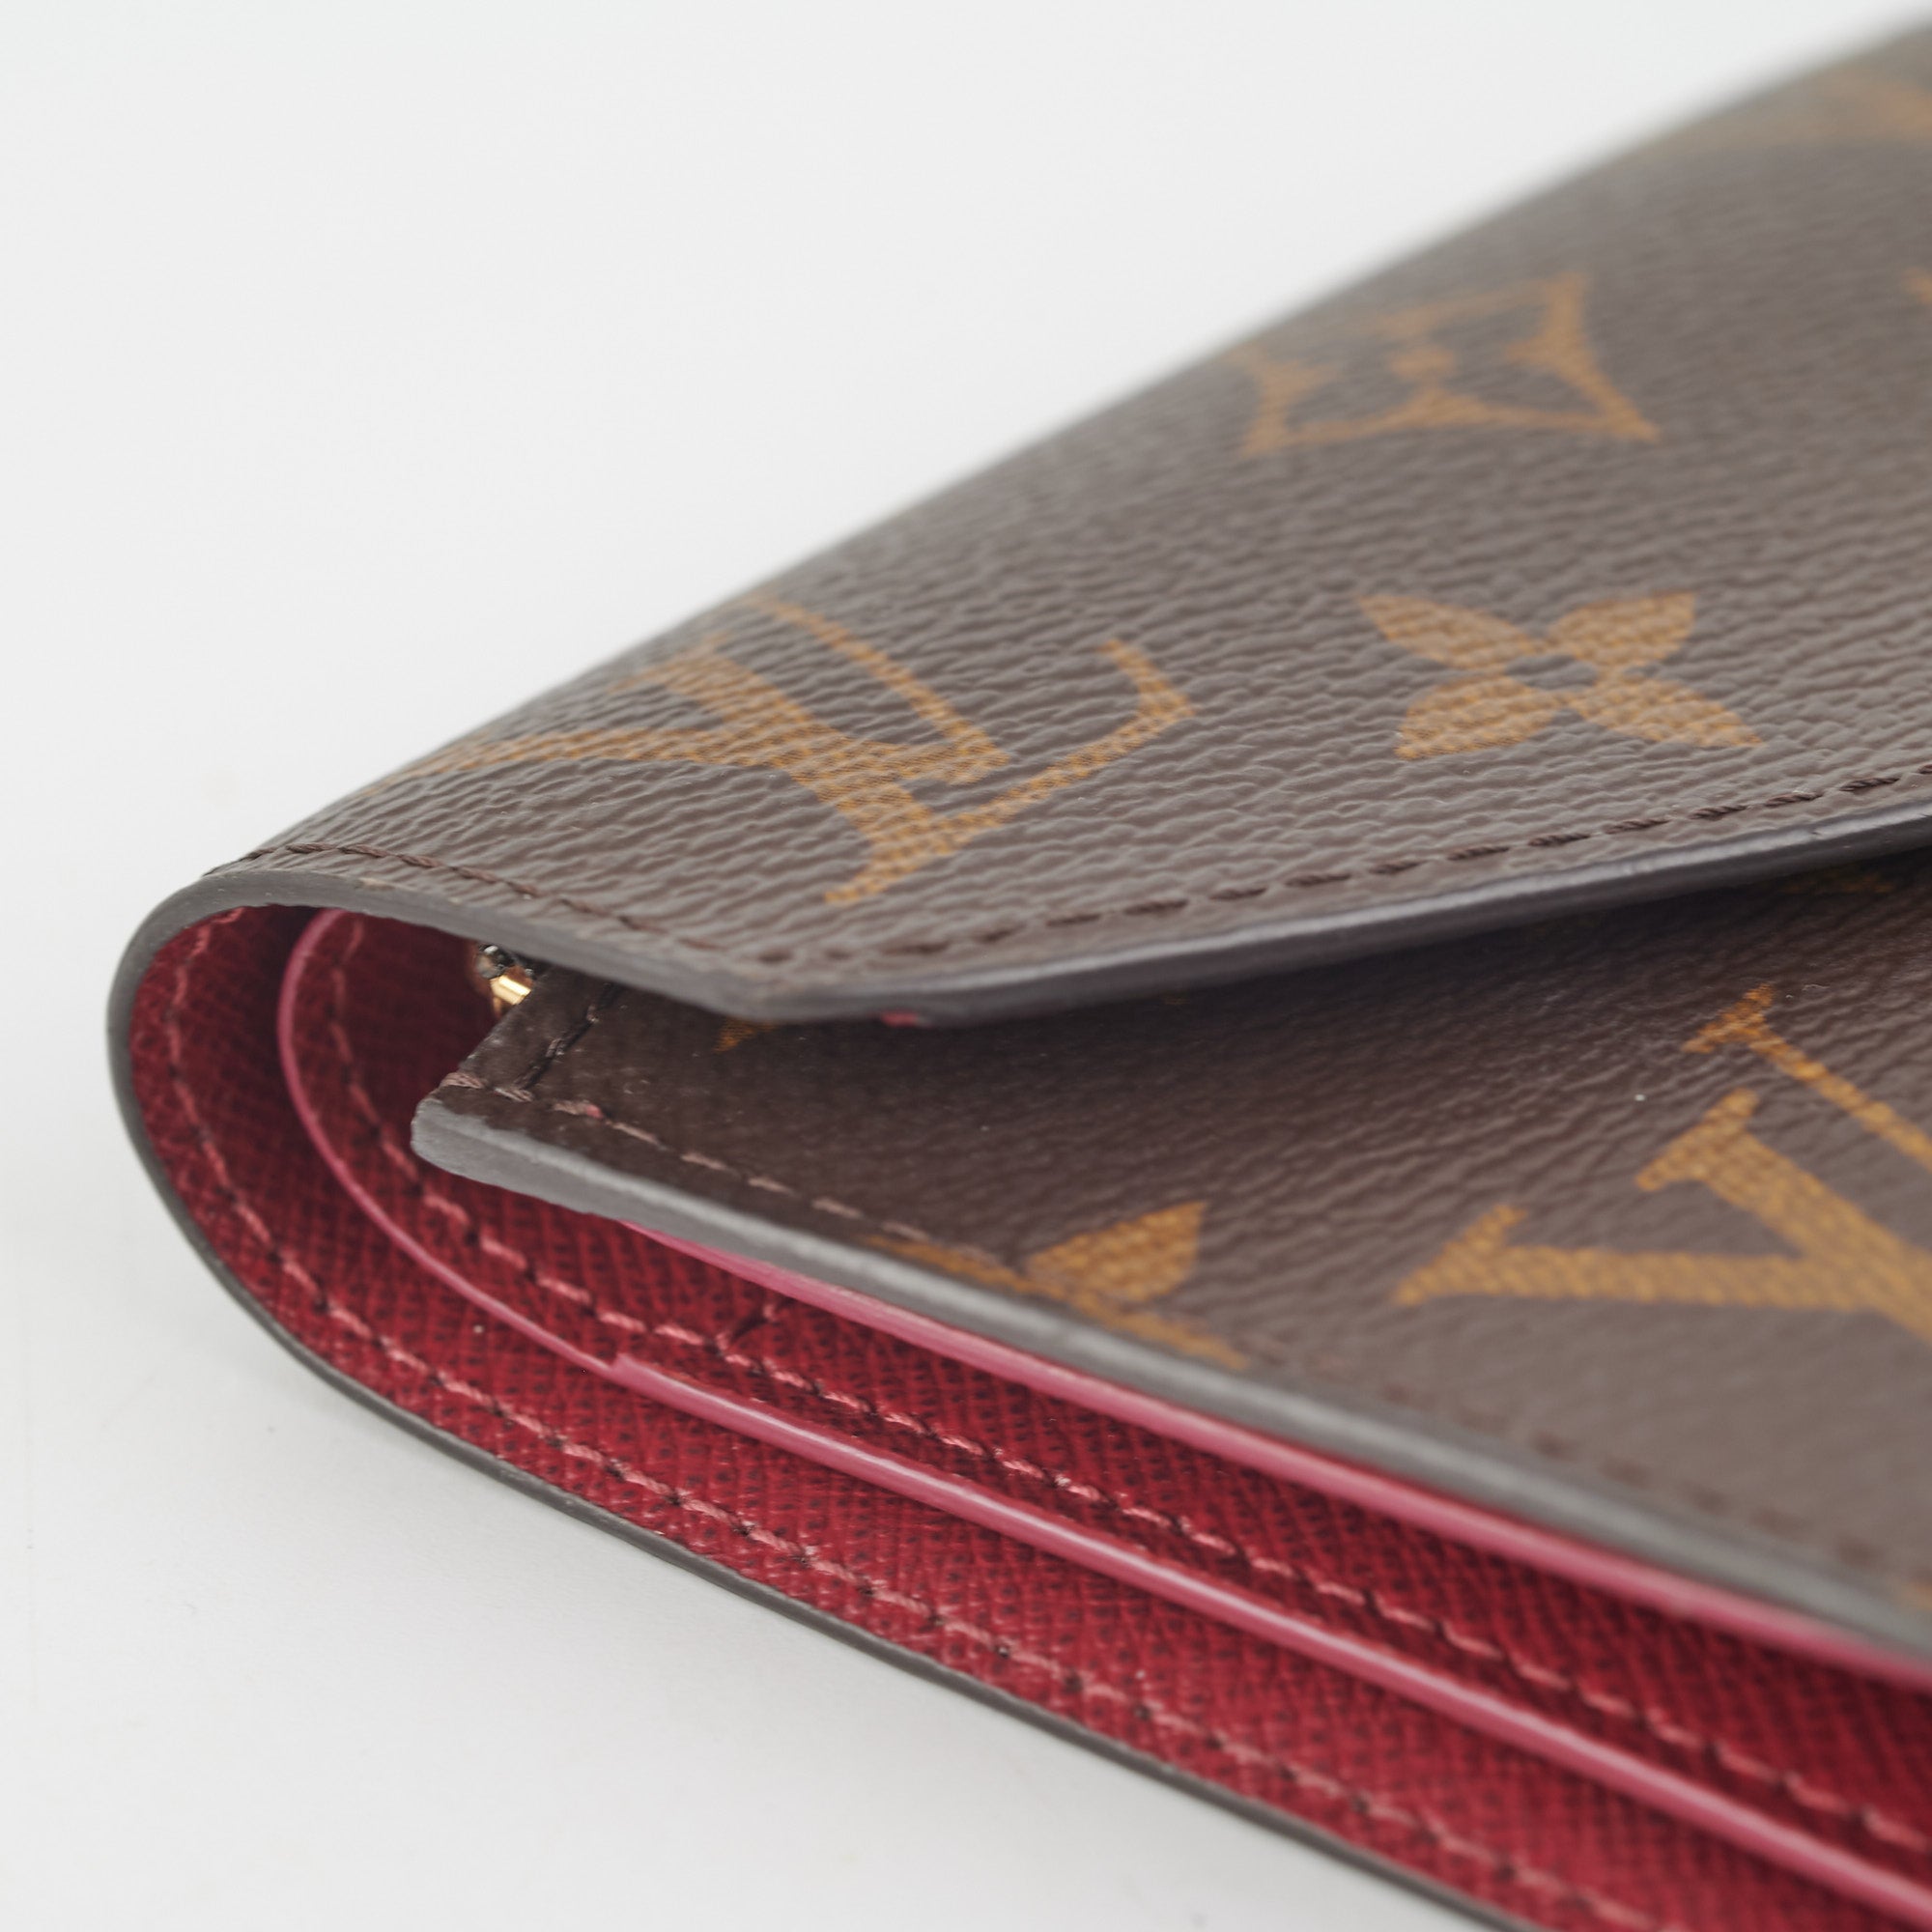 View 2 - Monogram SMALL LEATHER GOODS WALLETS Victorine Wallet, Louis  Vuitton ®